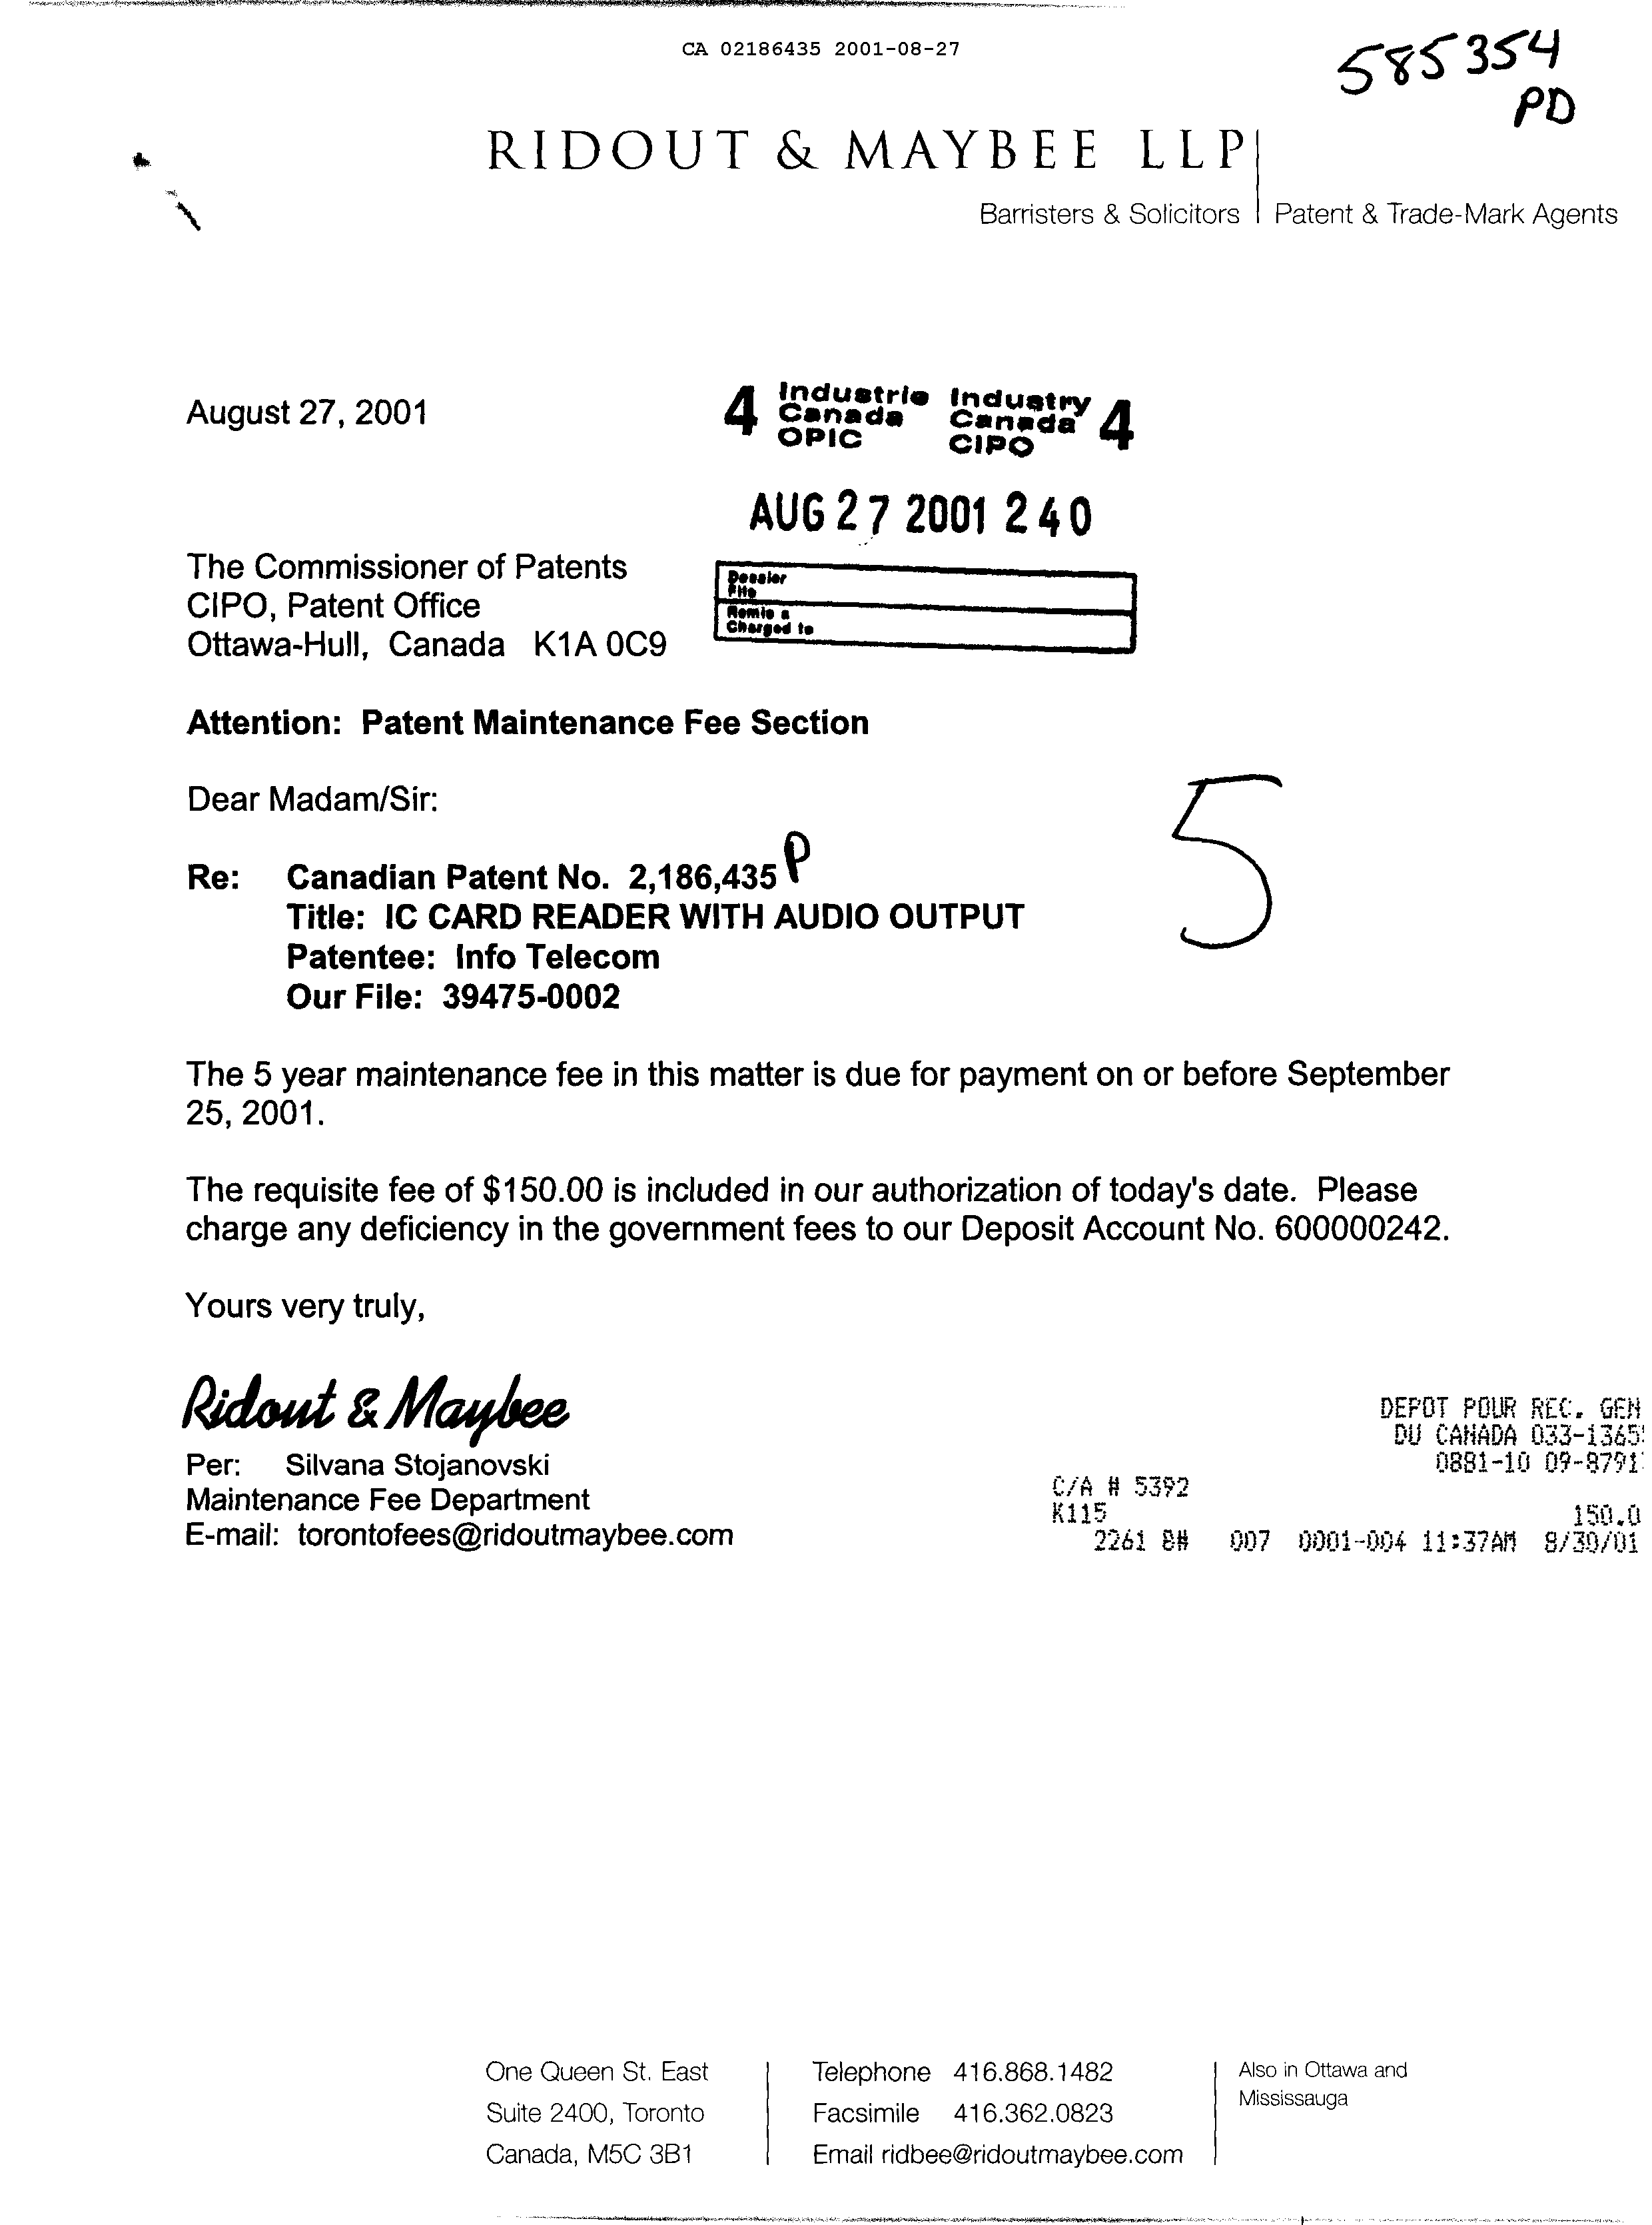 Canadian Patent Document 2186435. Fees 20010827. Image 1 of 1